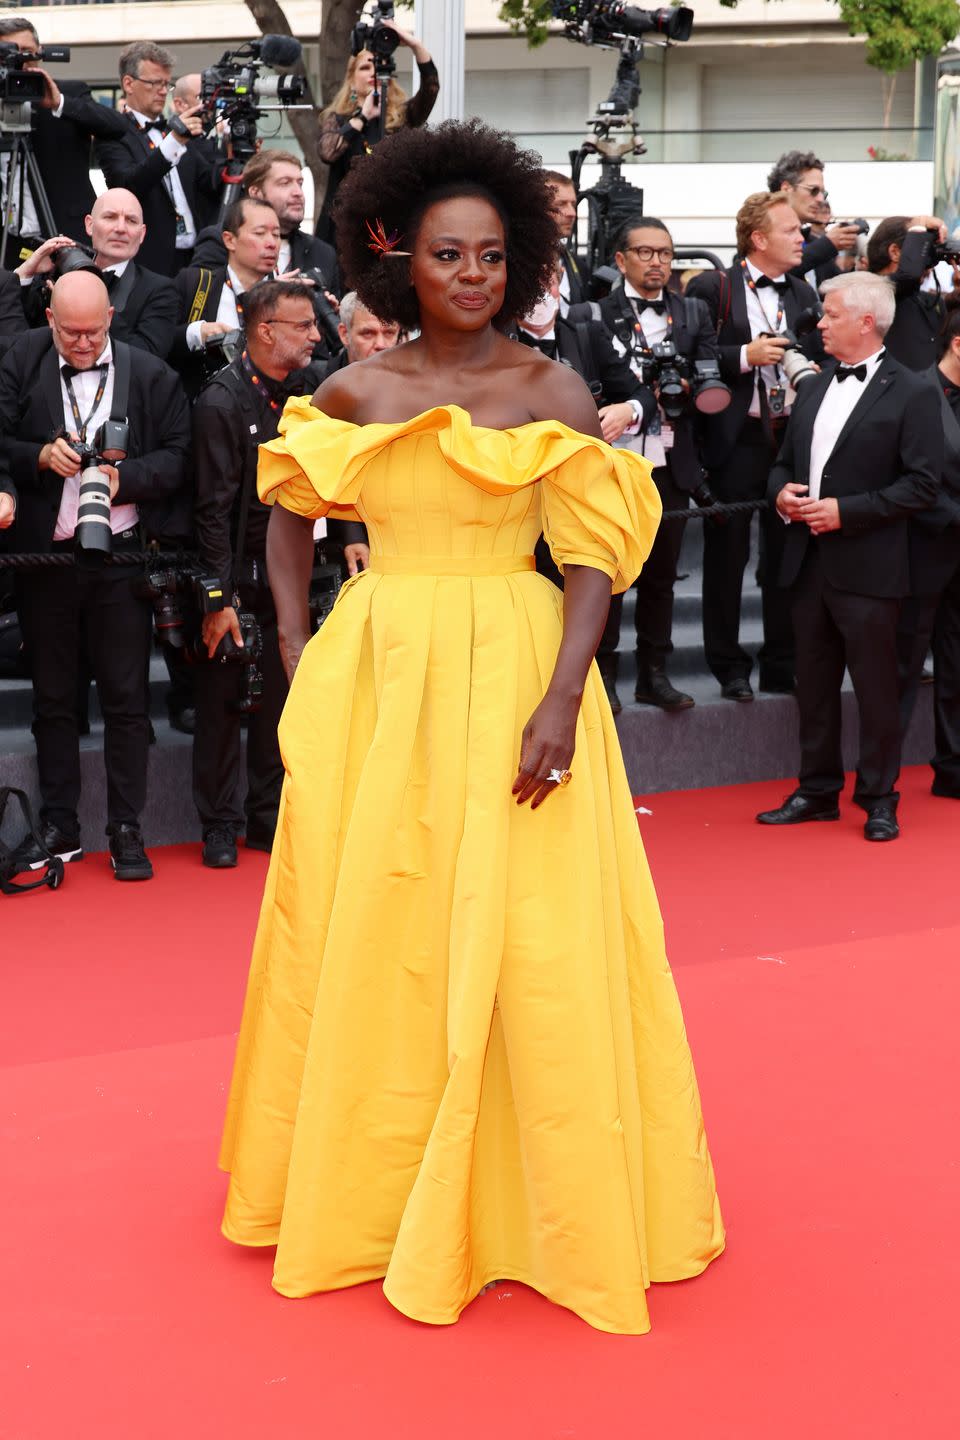 <p>Viola Davis brought the brights to the Cannes Film Festival this year, both with this sunshine-yellow Alexander McQueen gown and a number of other <a href="https://www.harpersbazaar.com/uk/fashion/g36943036/cannes-red-carpet-fashion/" rel="nofollow noopener" target="_blank" data-ylk="slk:block-colour looks" class="link ">block-colour looks</a> that she wore during her time in Cannes. The actress attended the Top Gun: Maverick premiere in this corseted off-the-shoulder dress which featured a ruffled neckline and full taffeta skirt, and finished her look with some <a href="https://www.harpersbazaar.com/uk/fashion/jewellery-watches/g36967815/cannes-jewellery/" rel="nofollow noopener" target="_blank" data-ylk="slk:equally colourful Boucheron jewellery" class="link ">equally colourful Boucheron jewellery</a>.</p>